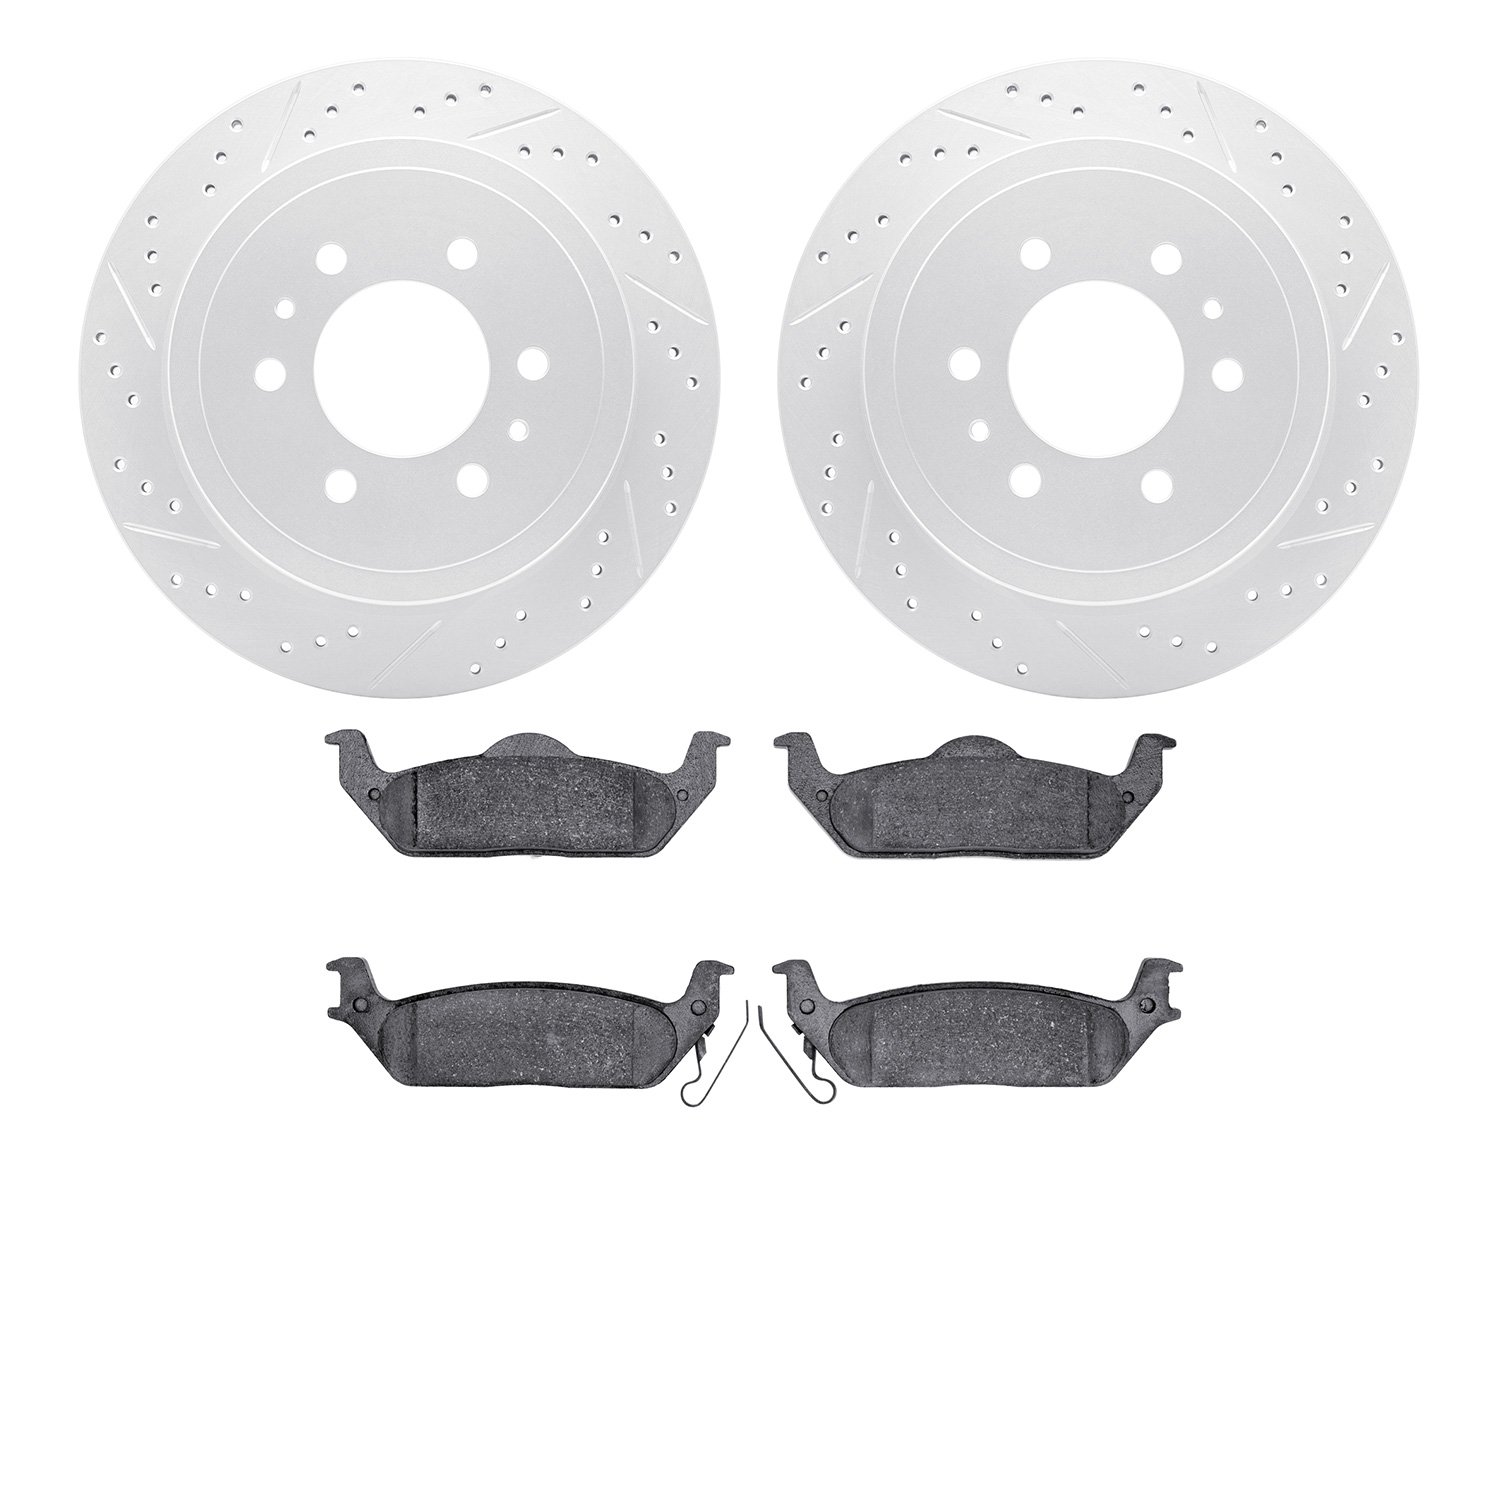 2402-54048 Geoperformance Drilled/Slotted Brake Rotors with Ultimate-Duty Brake Pads Kit, 2004-2011 Ford/Lincoln/Mercury/Mazda,